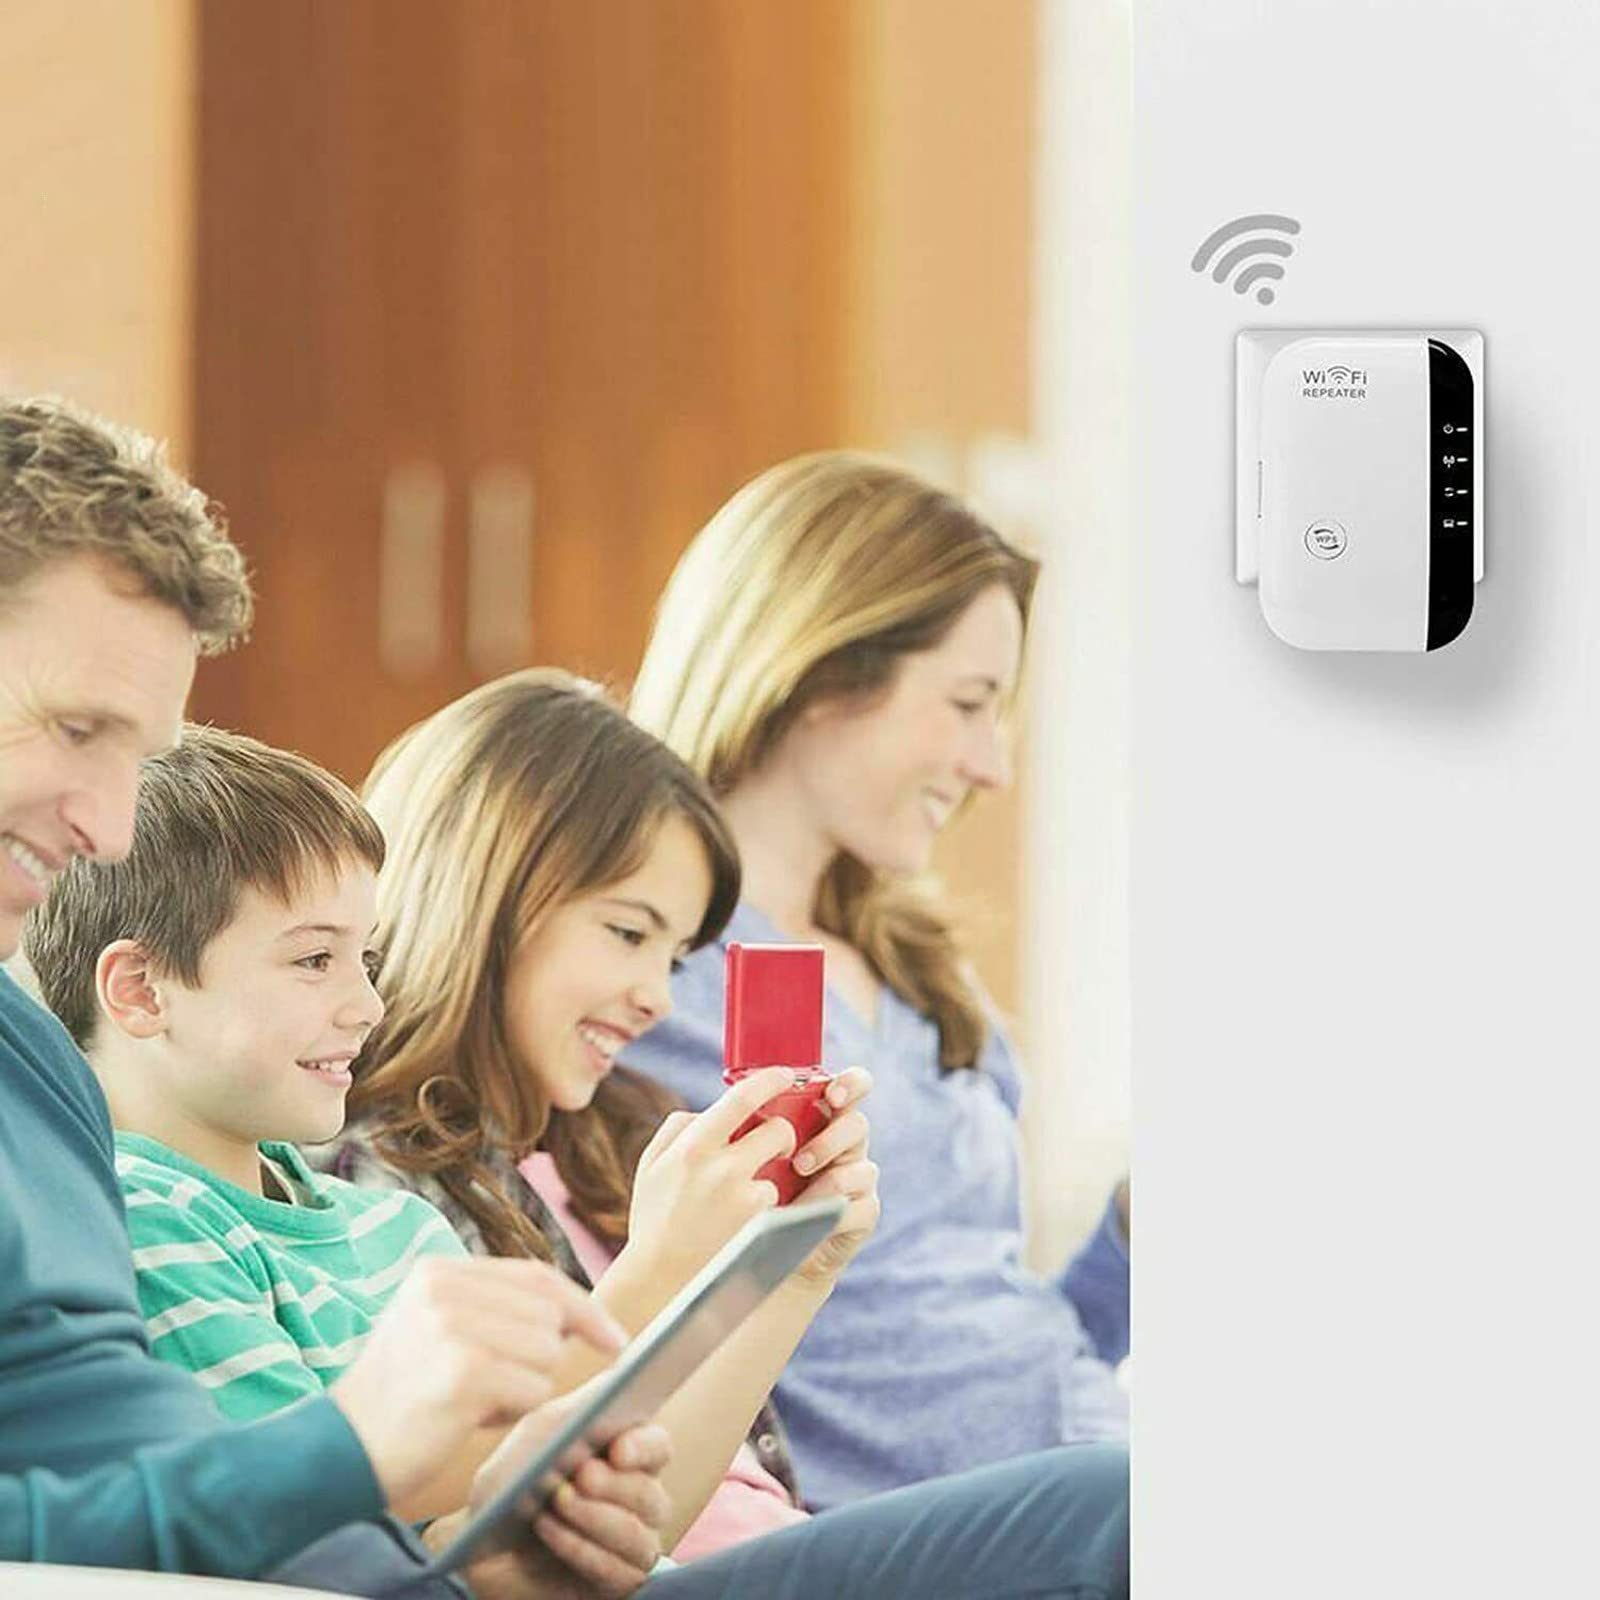 WiFi Extenders Signal Booster for Home, WiFi Repeater, Wireless Internet Repeater, Long Range Wireless Internet Repeater and Signal Amplifier with Ethernet Port, Access Point, Easy to Set Up